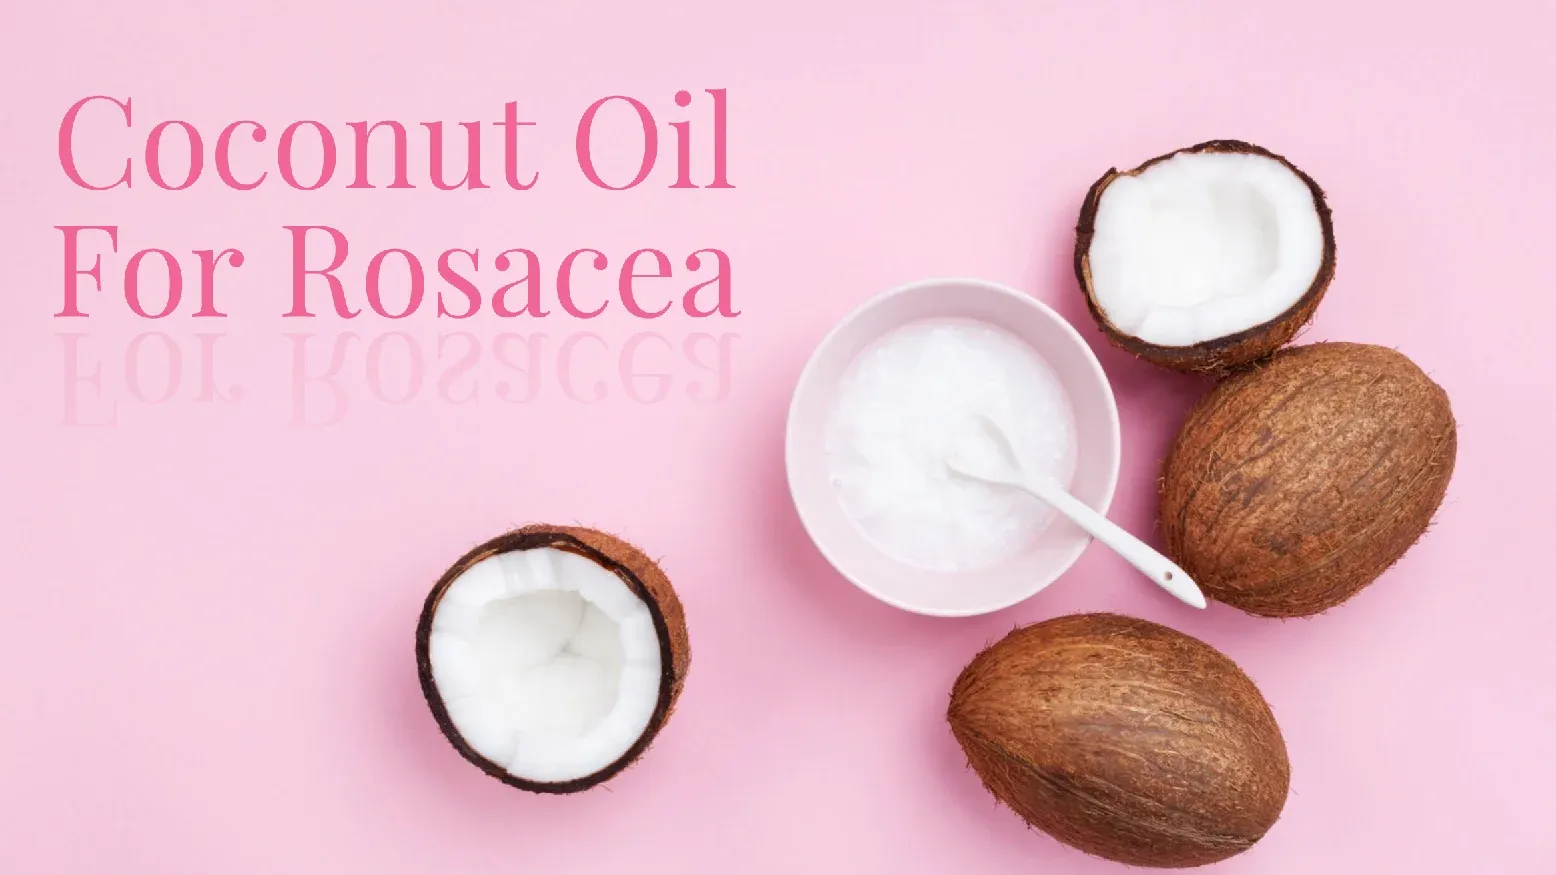  Use Coconut Oil For Rosacea